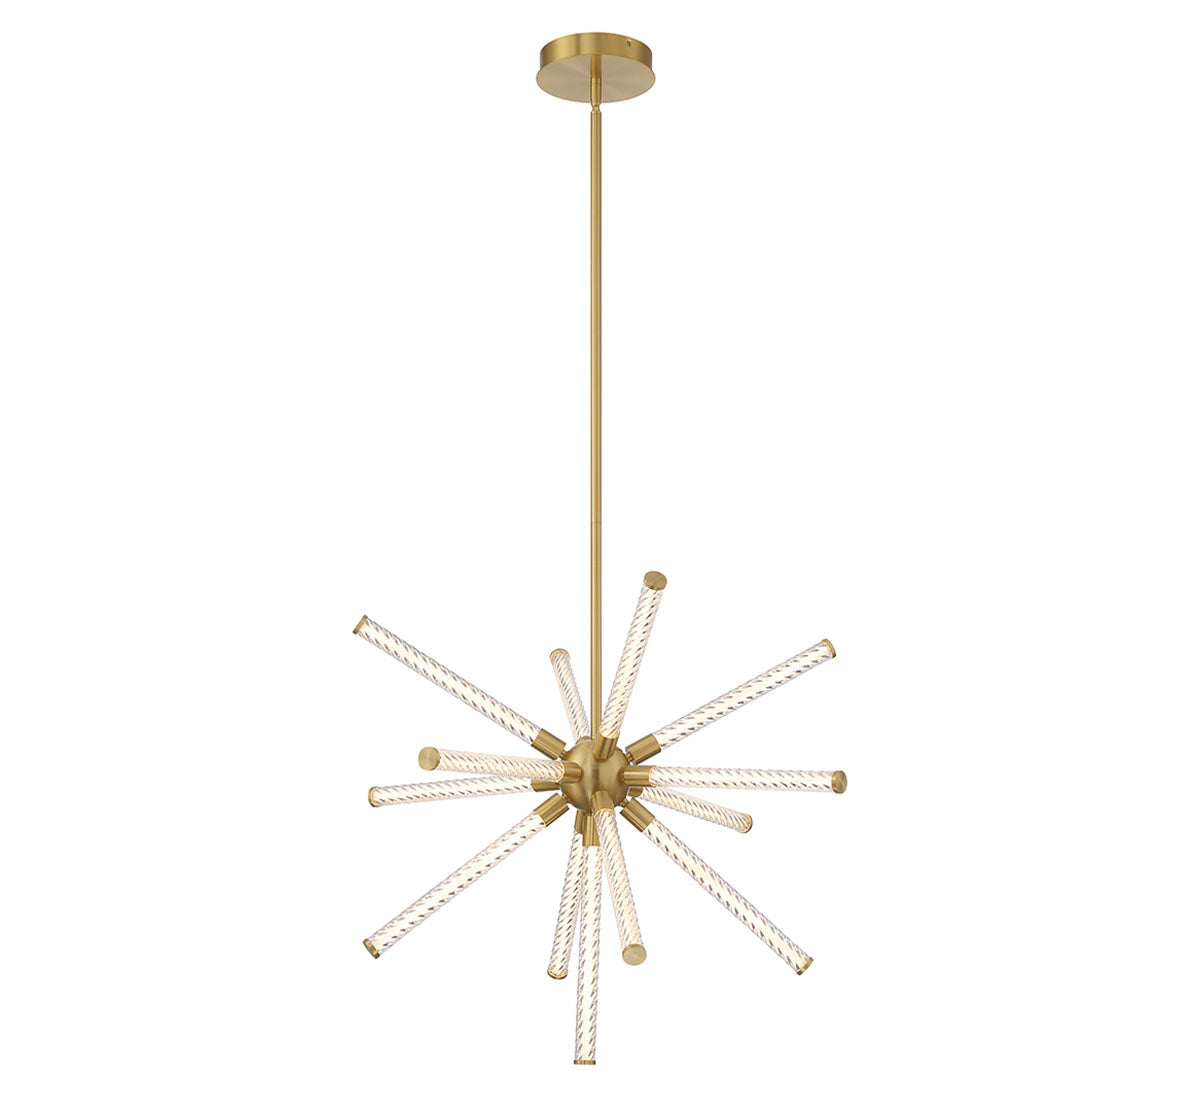 VOLTERRA 10153-07, Small LED Chandelier